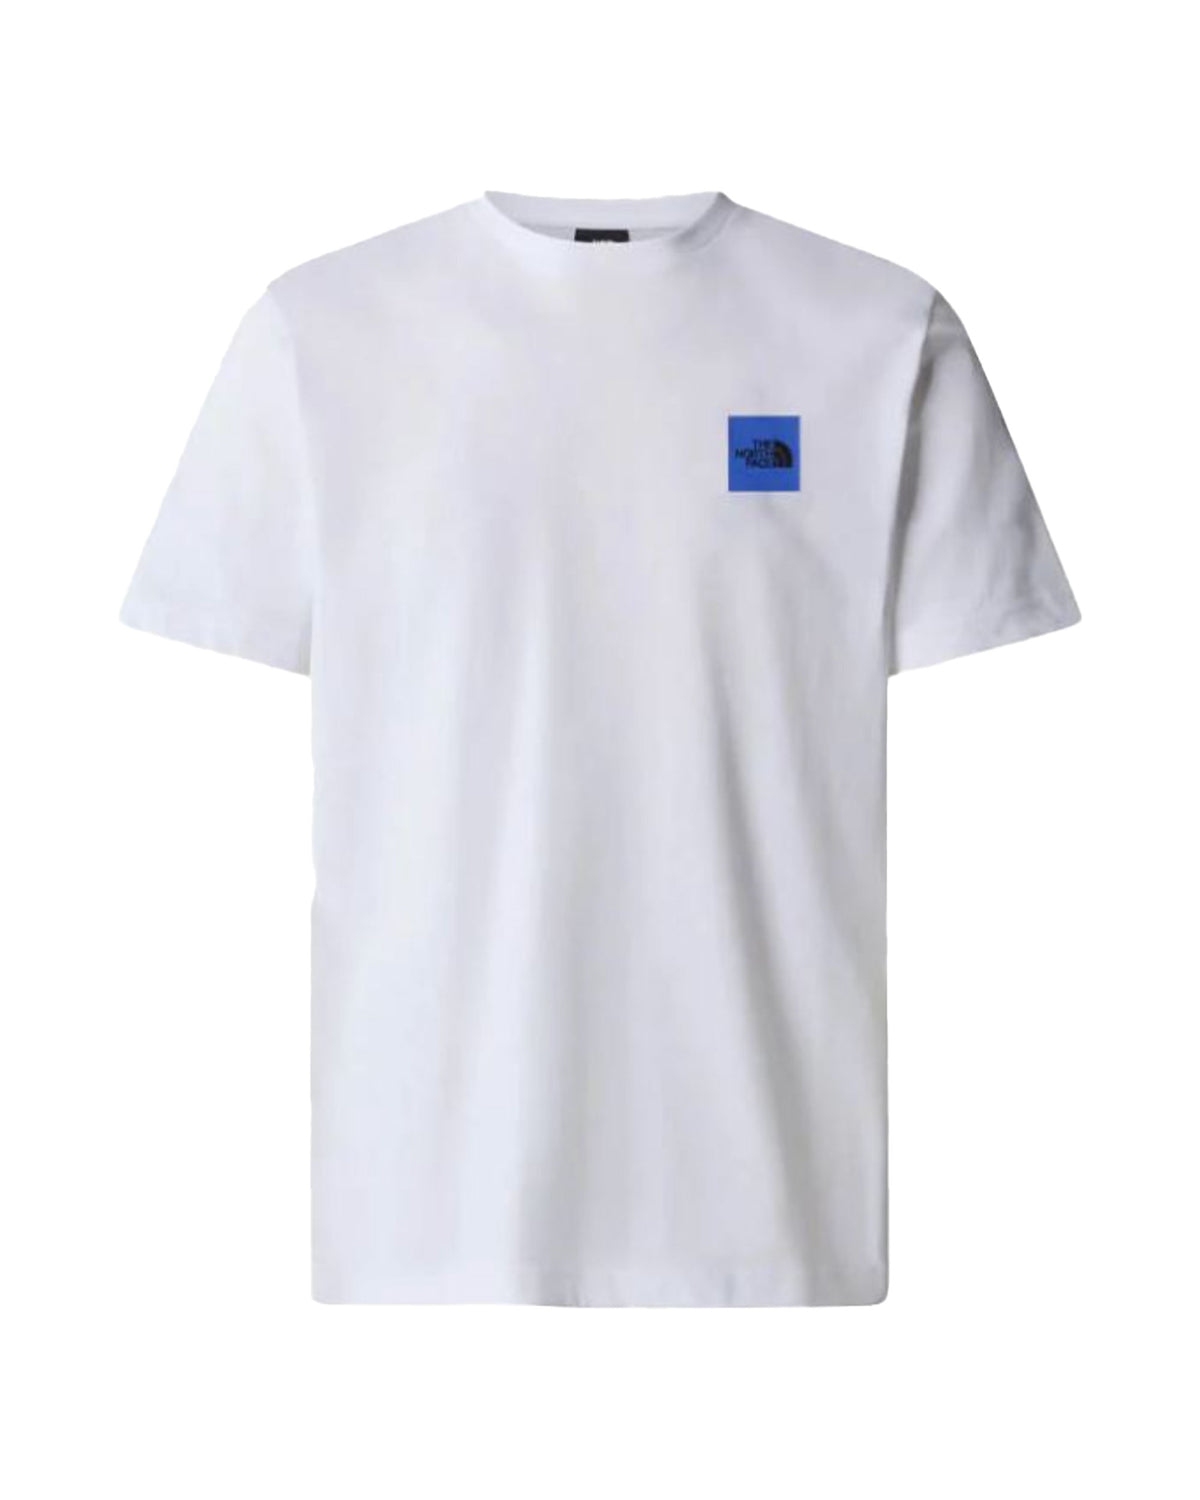 Man Tee The North Face Coordinate White